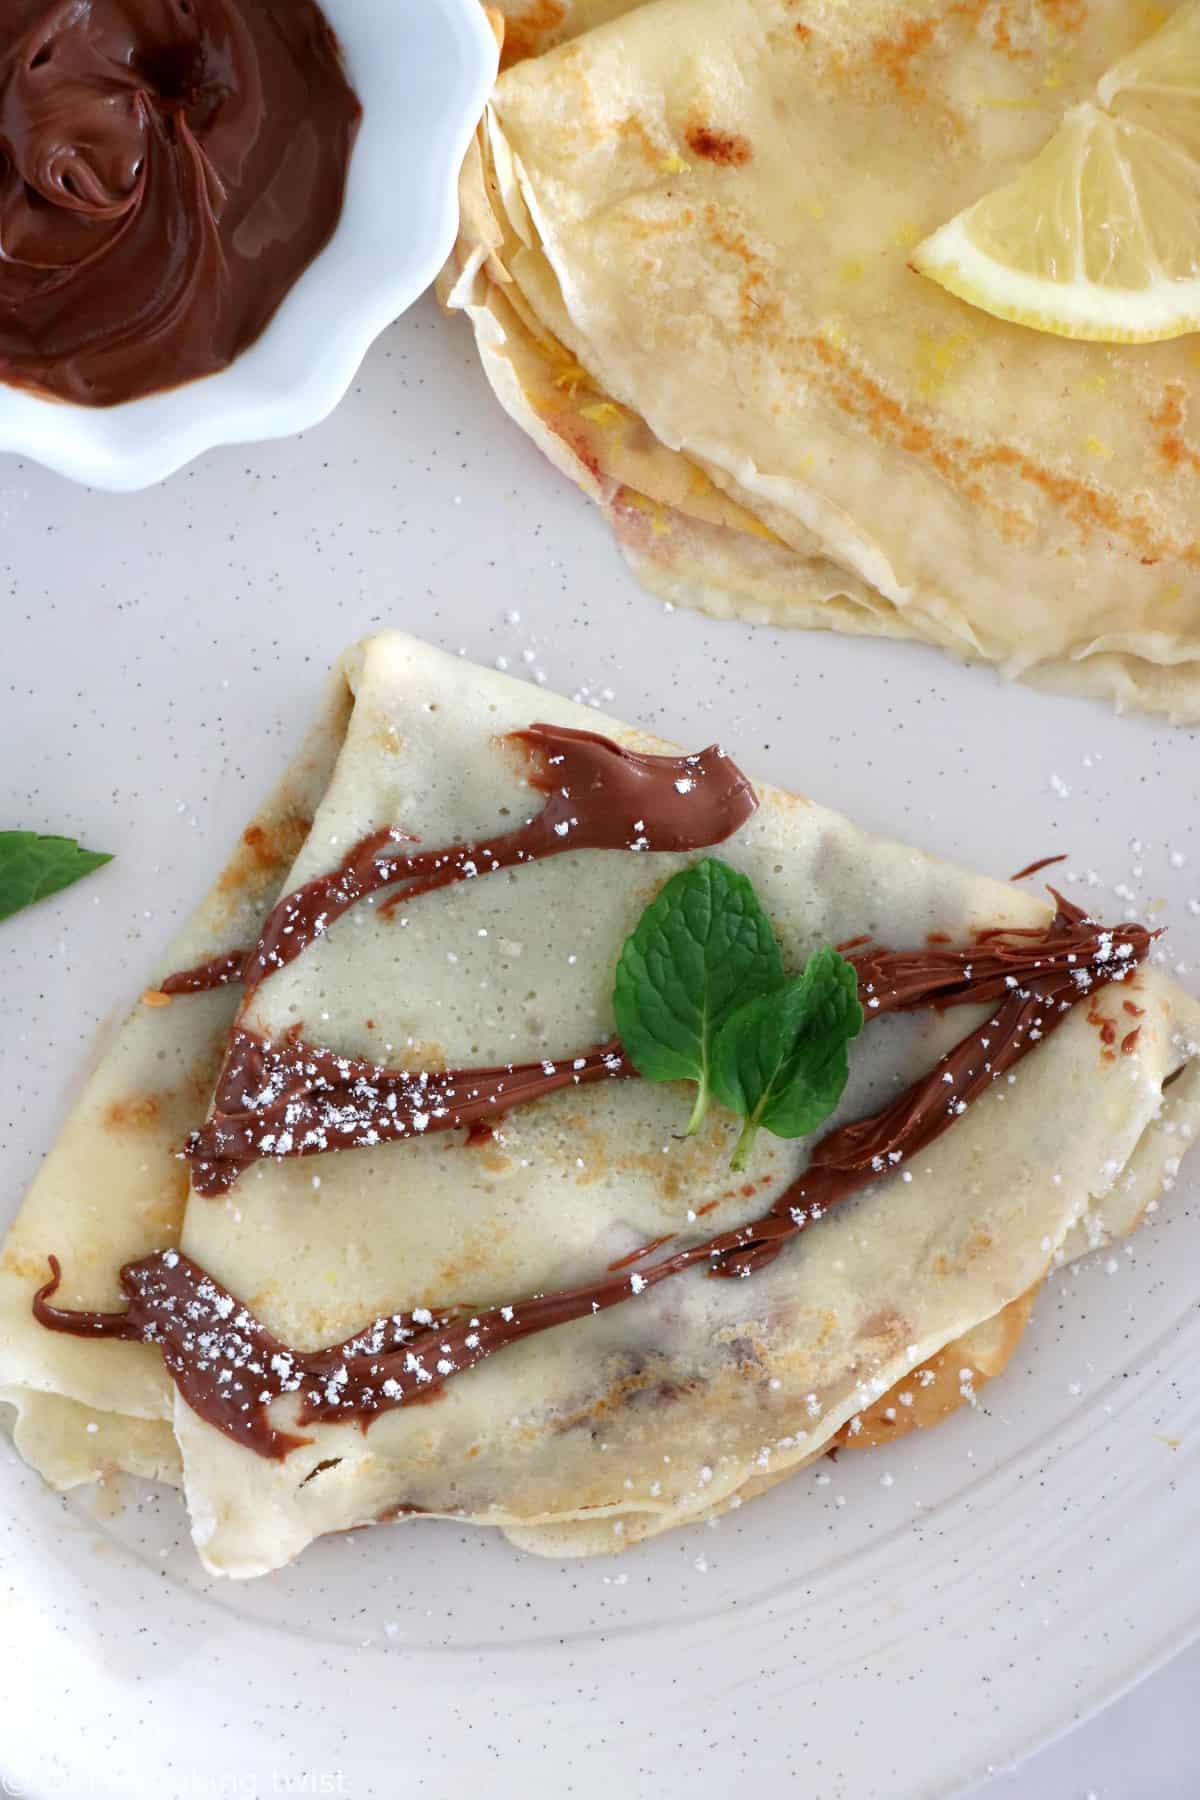 Discover my favorite crepe filling ideas for a perfect and delicious dessert crepe party! Jam, chocolate spread, lemon and sugar, you'll sure find your favorite too!